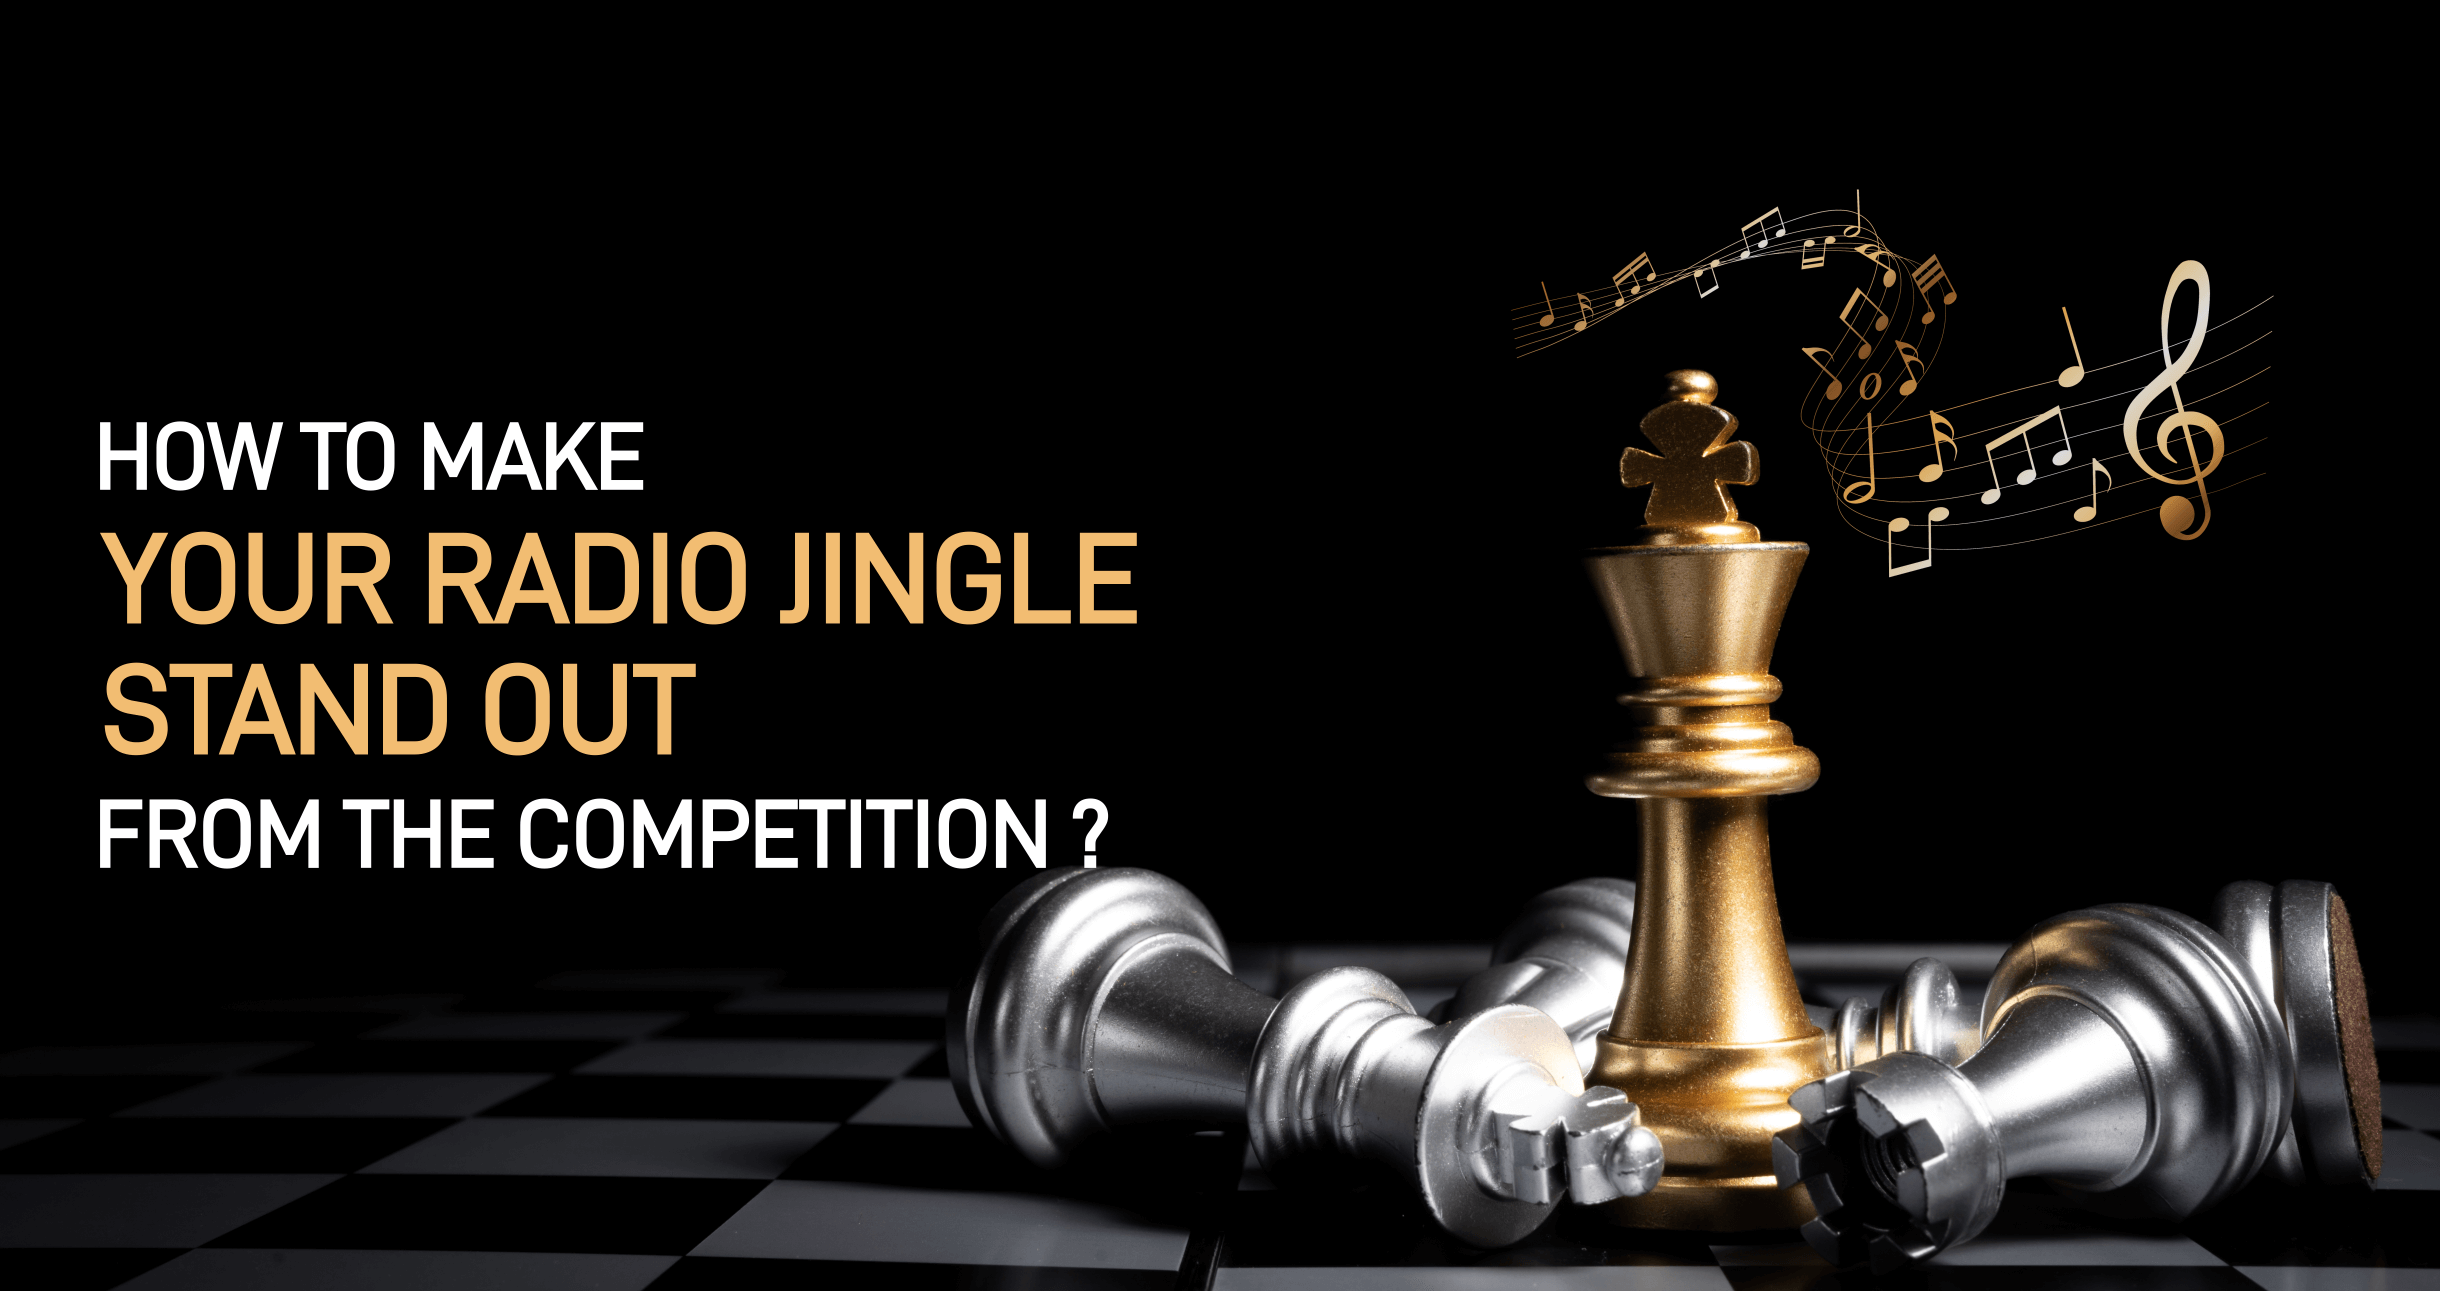 How to Make Your Radio Jingle Stand Out from the Competition